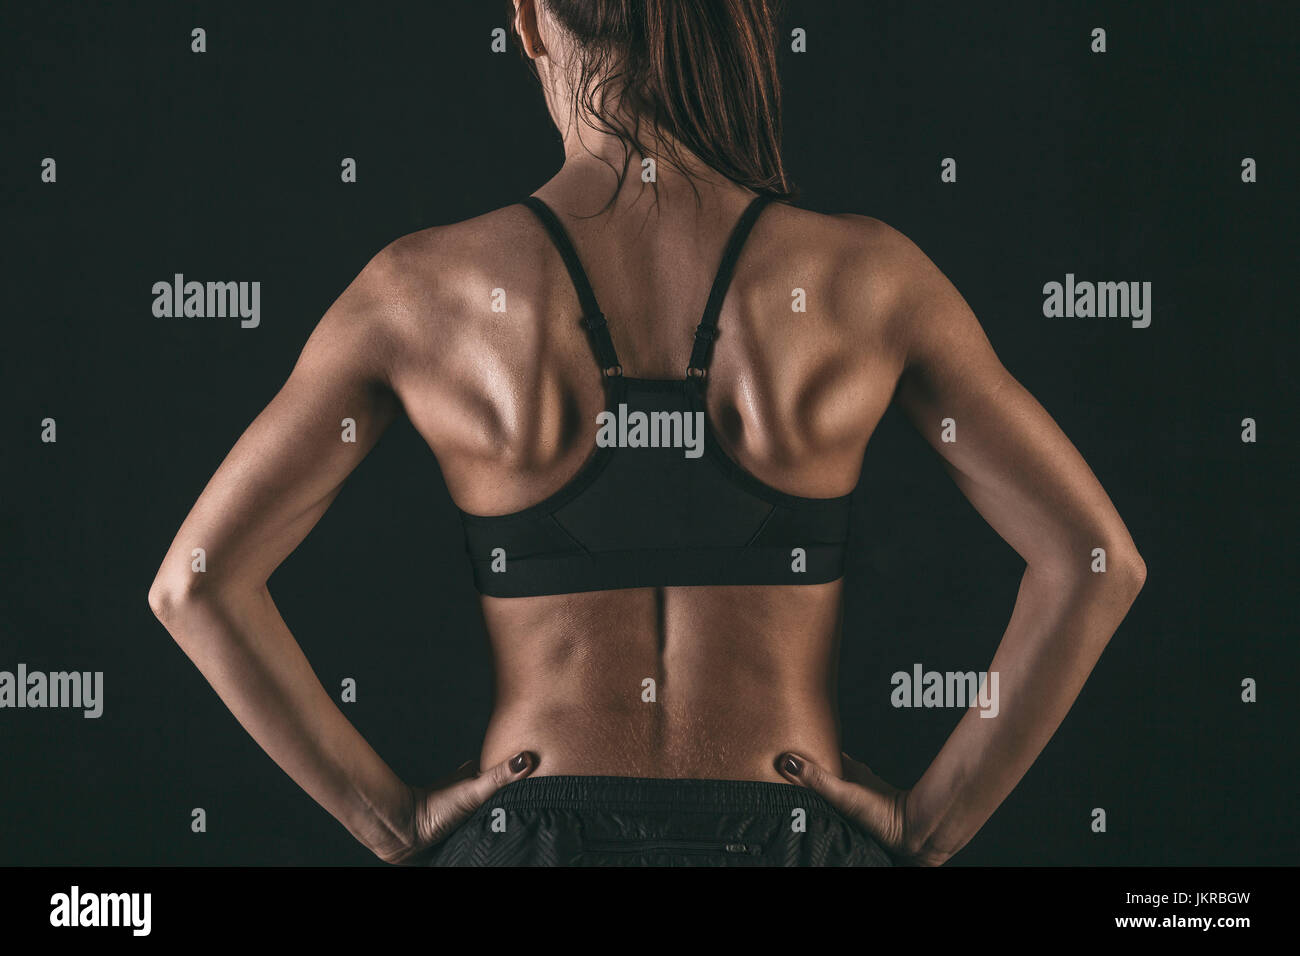 Rear view of female athlete wearing sports bra standing with hands on hip against black background Stock Photo